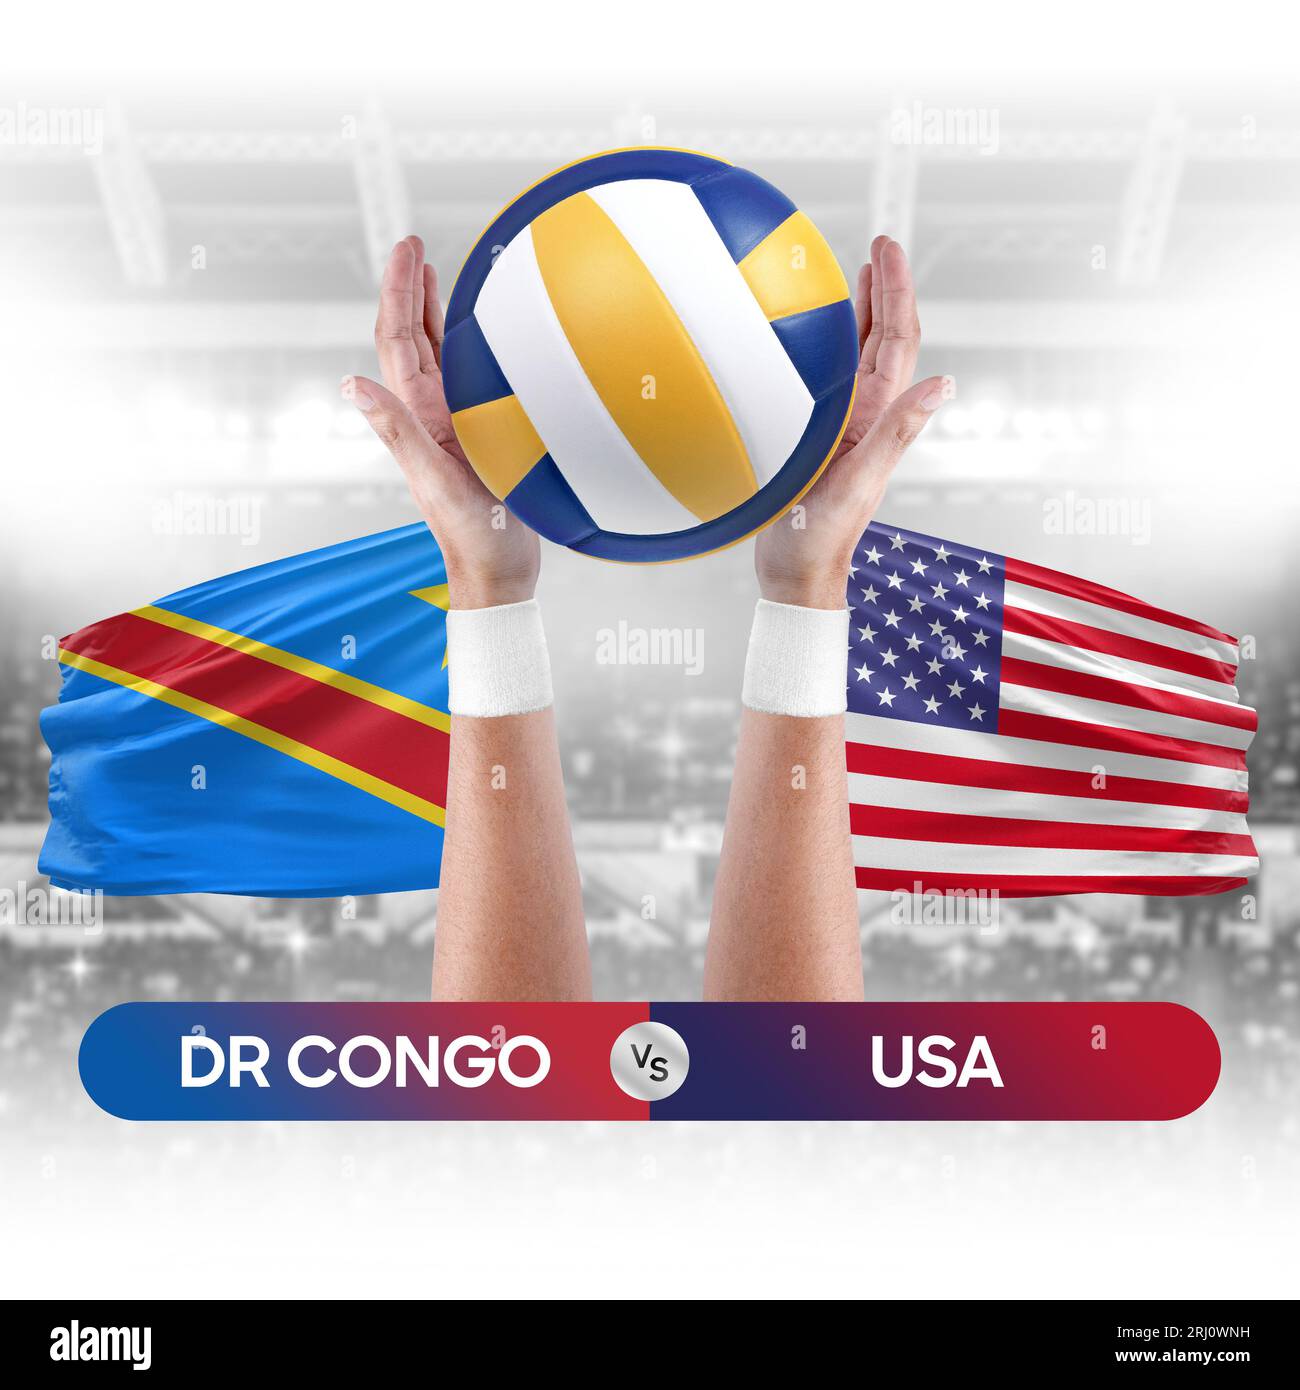 Dr Congo vs USA national teams volleyball volley ball match competition concept. Stock Photo